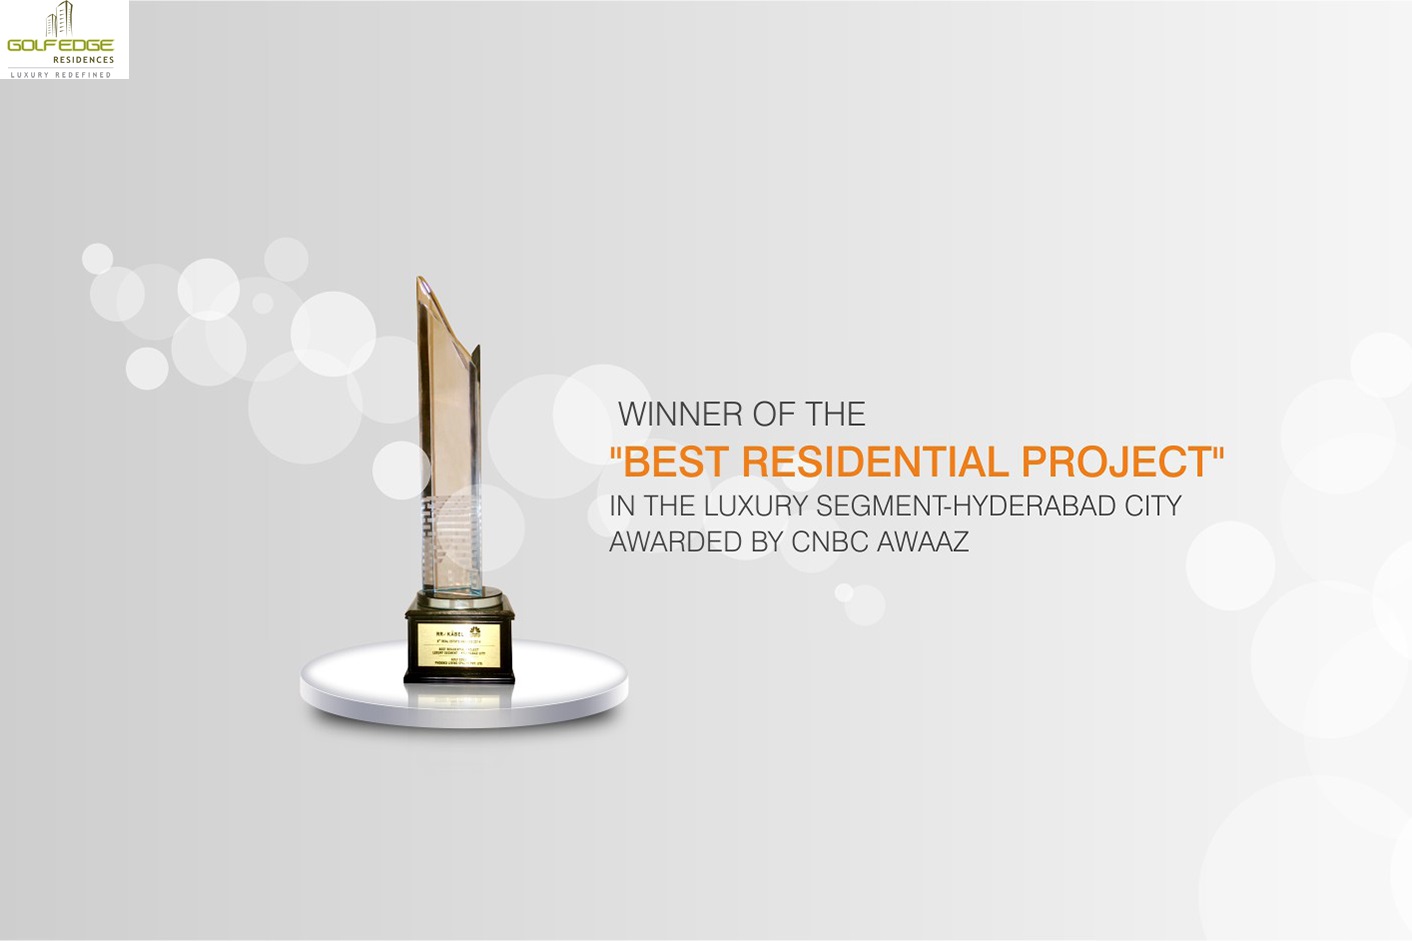 Phoenix Golf Edge is winner of the best residential project in the luxury segment - Hyderabad city, awarded by CNBZ AWAAZ